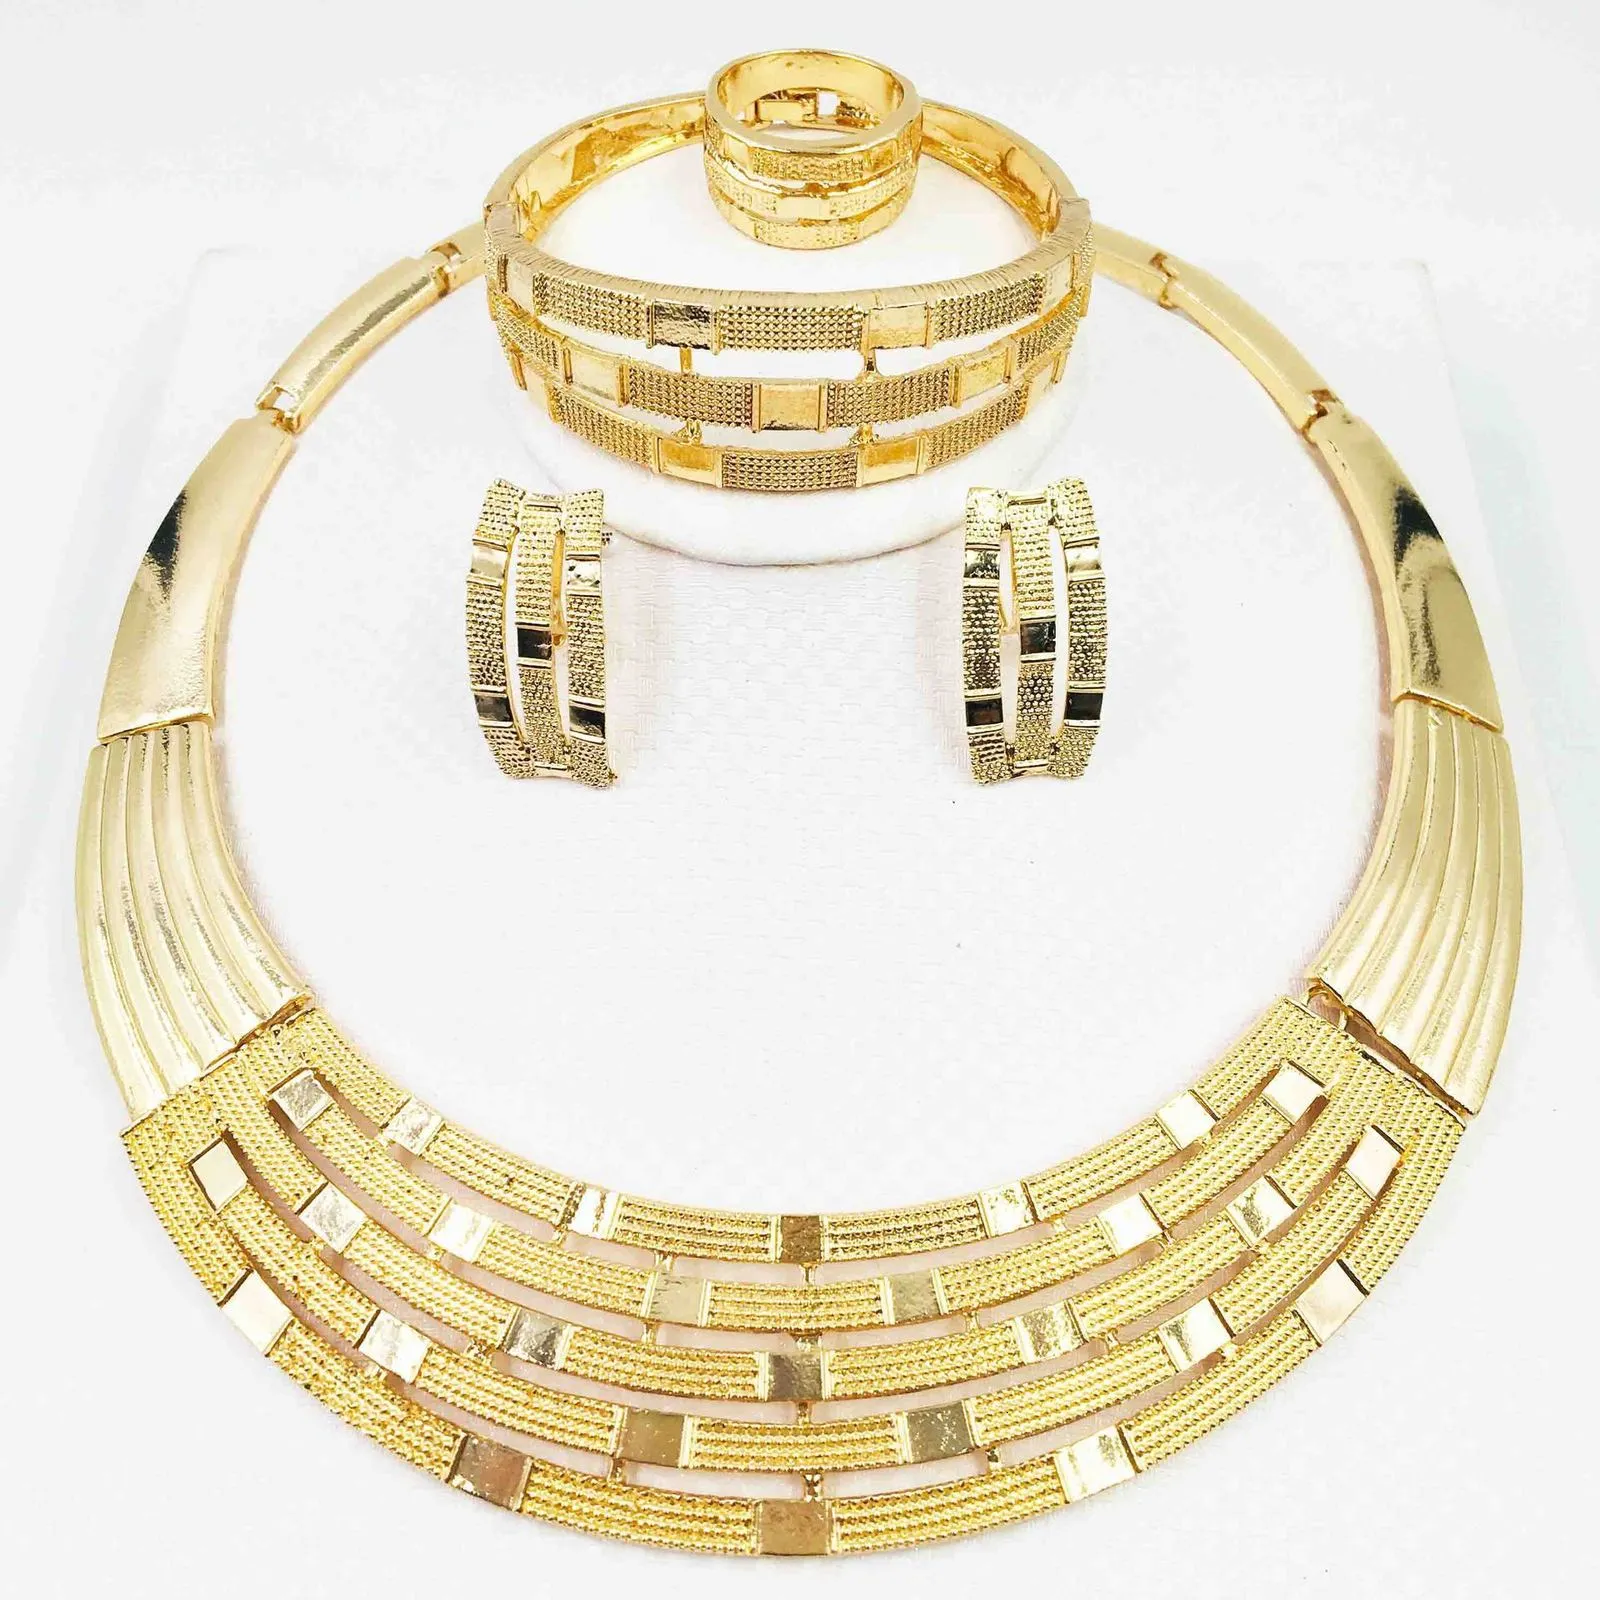 African 24k Gold Color Jewelry Sets For Women Dubai Bridal Wedding Gifts Choker Necklace Bracelet Earrings Ring Jewellery Set 220224